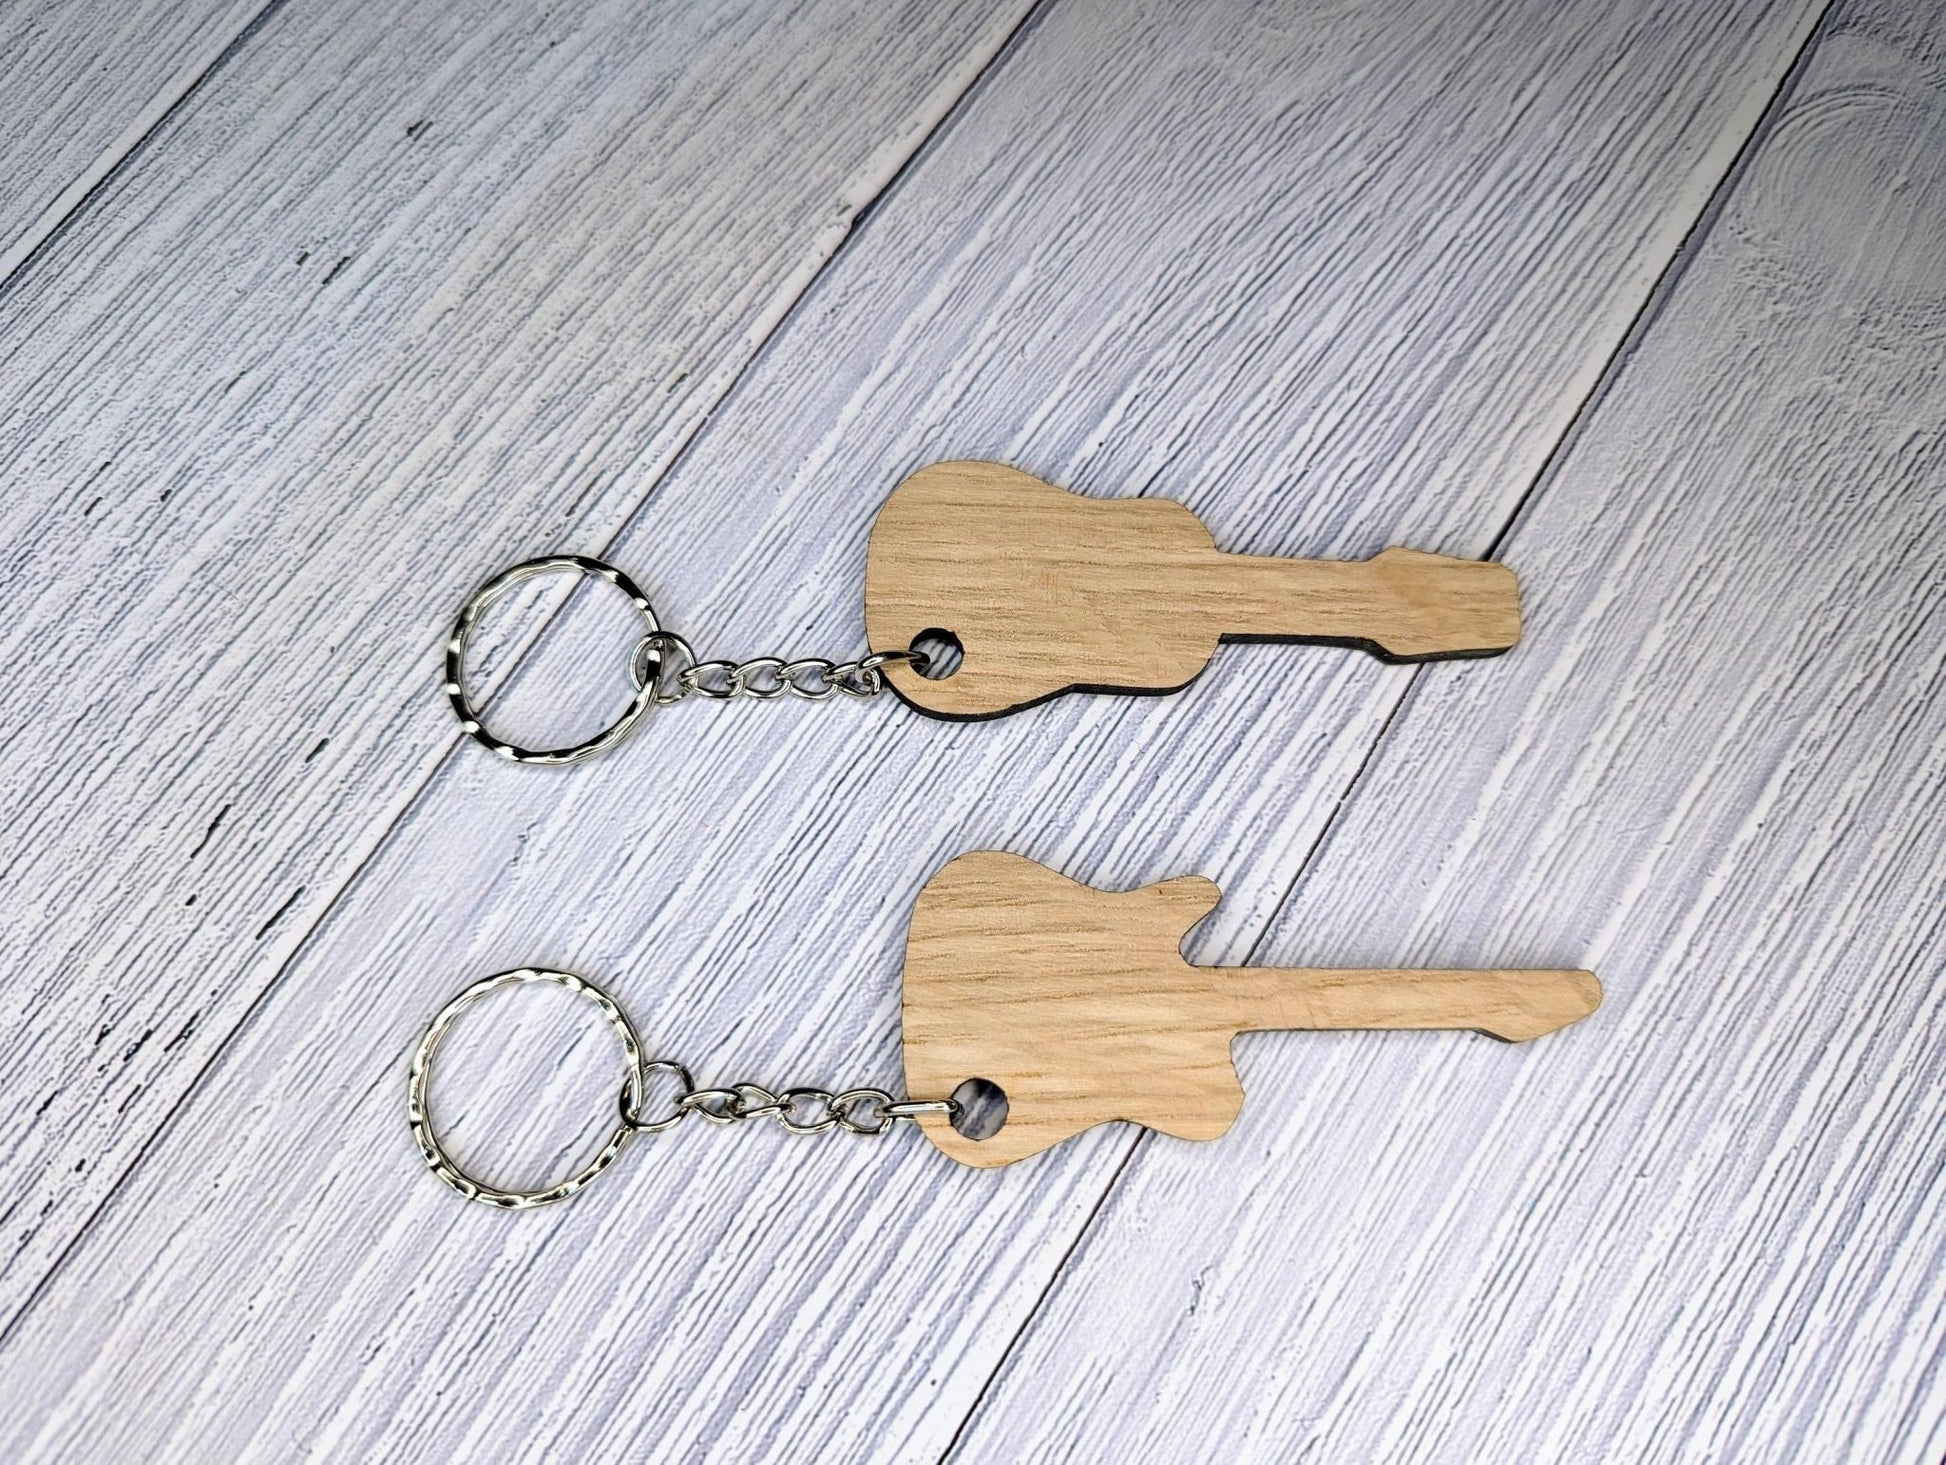 Custom Wooden Guitar Keyrings - Acoustic & Electric - Personalised Music Gift - Bag Charm - Bag Tag - CherryGroveCraft